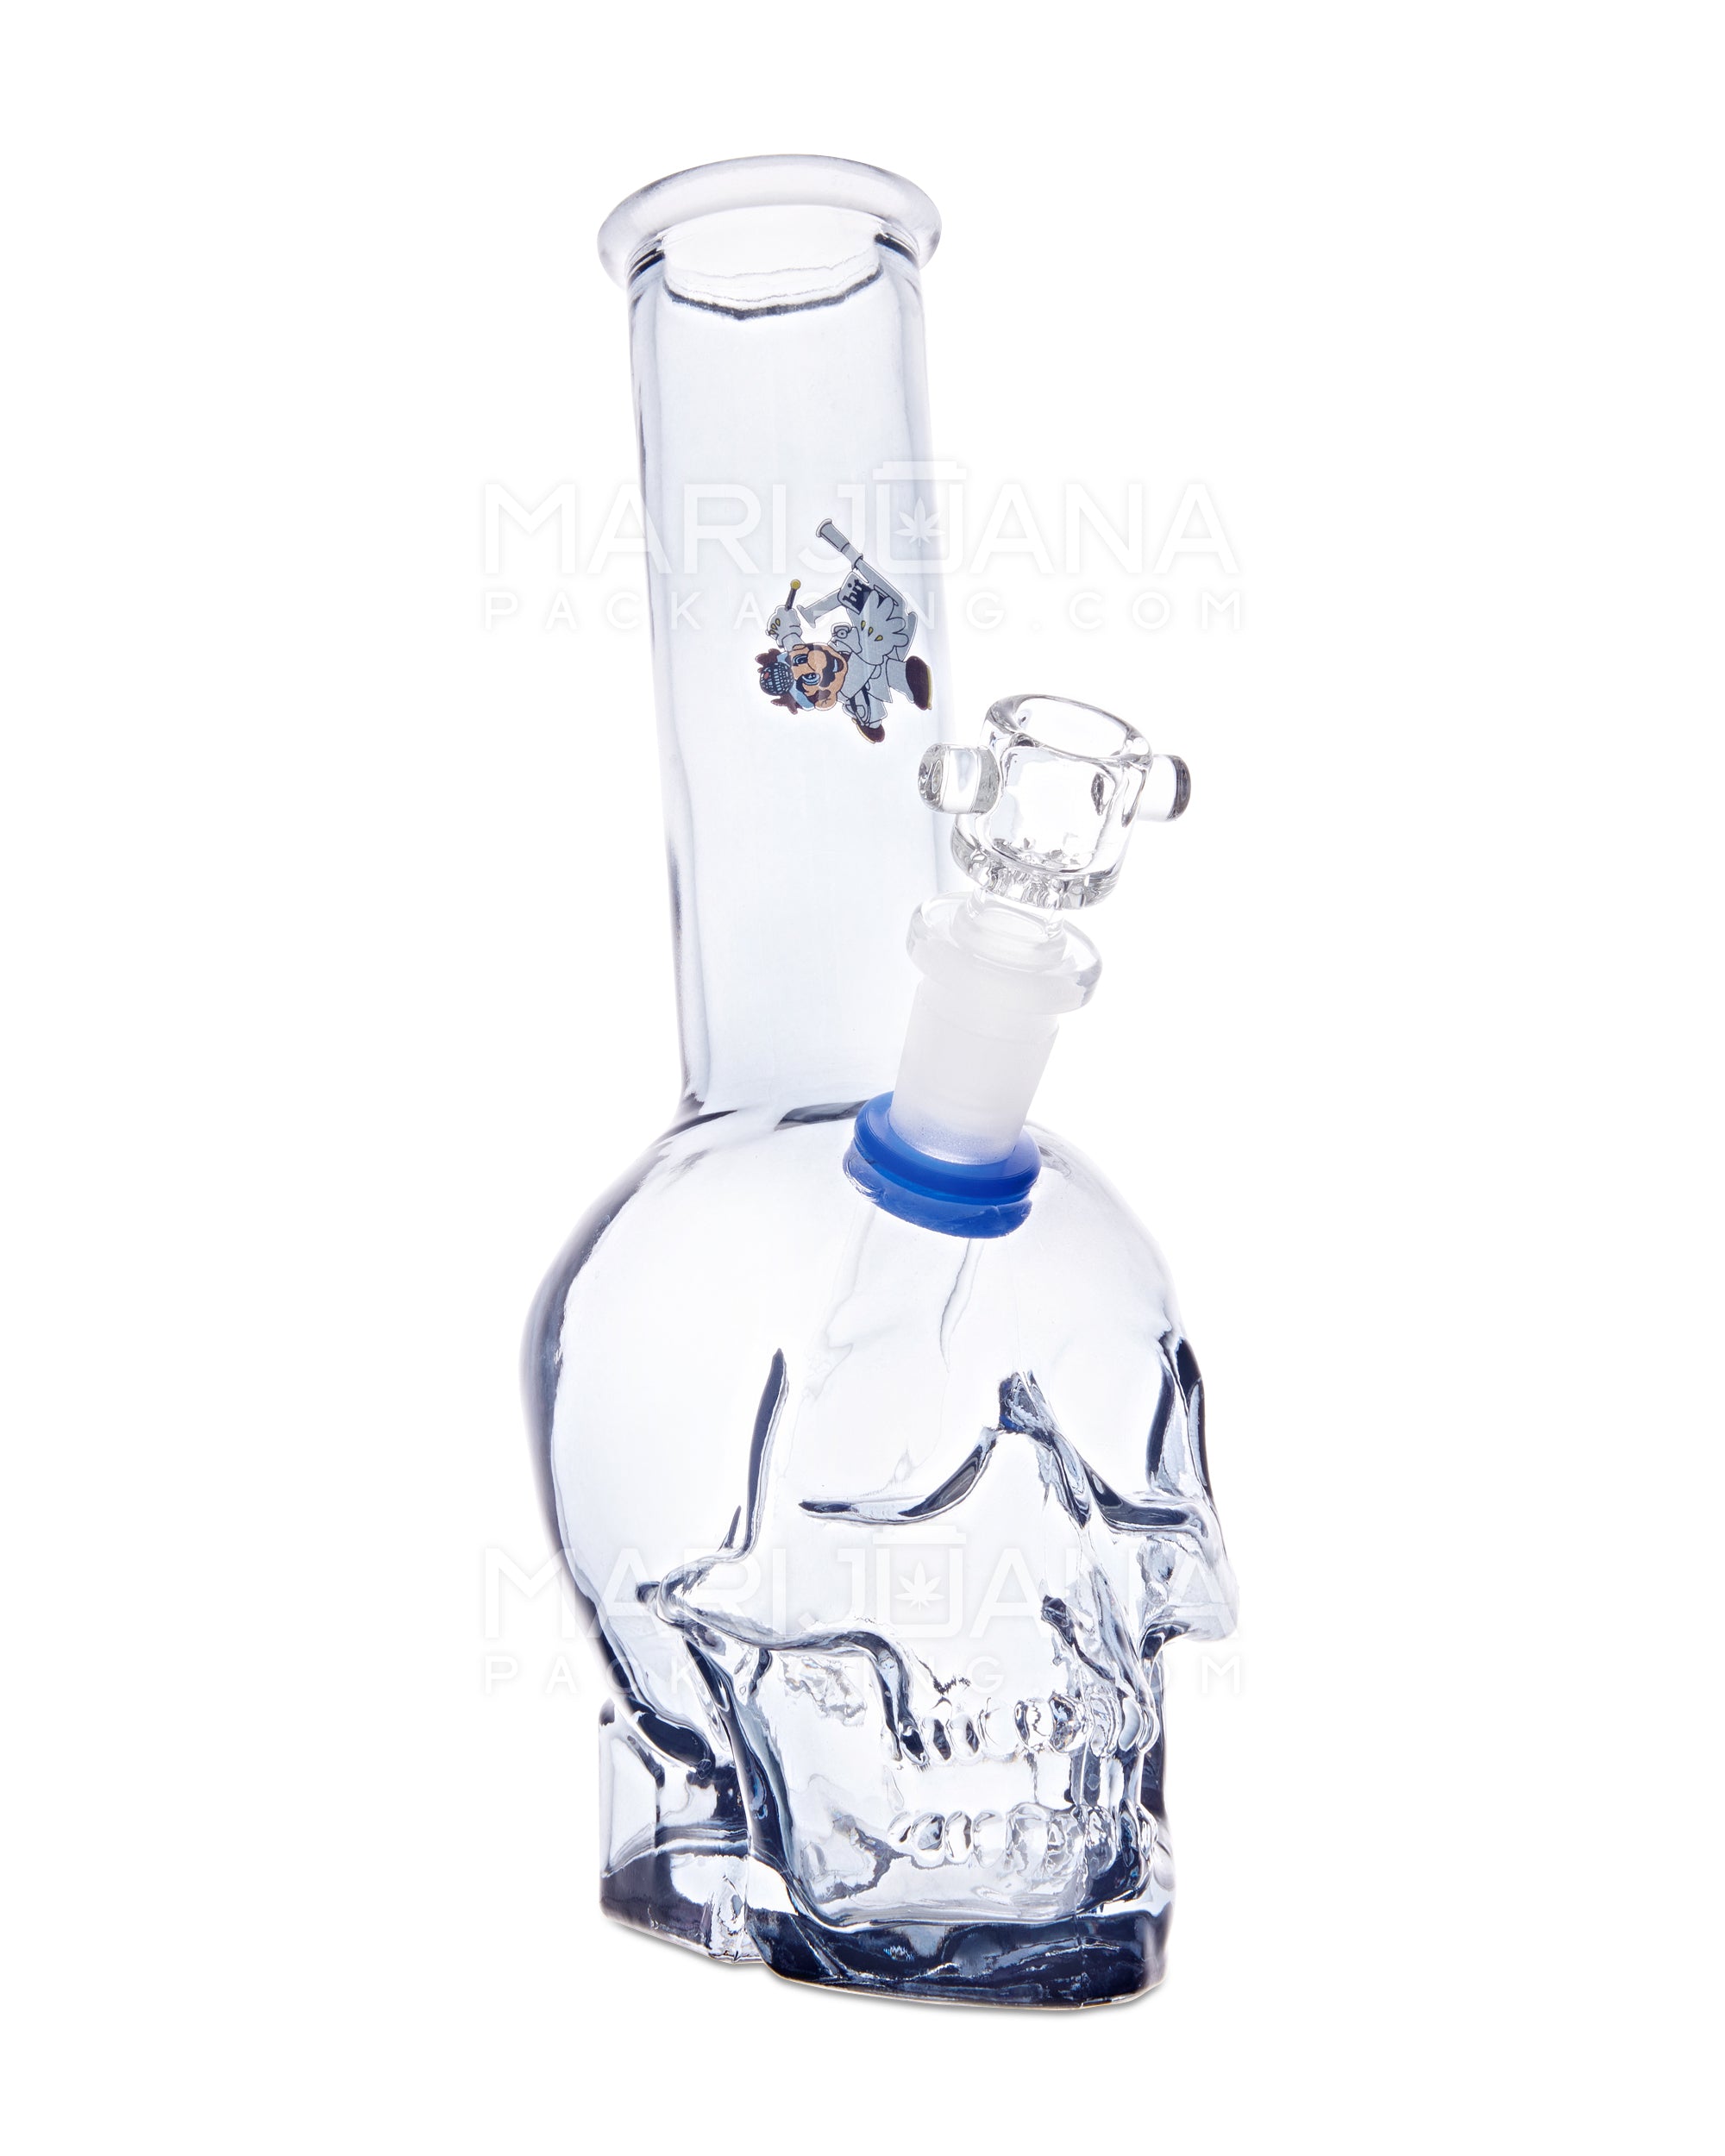 Angled Neck Crystal Skull Head Decal Glass Water Pipe | 9.5in Tall - Grommet Bowl - Assorted - 6